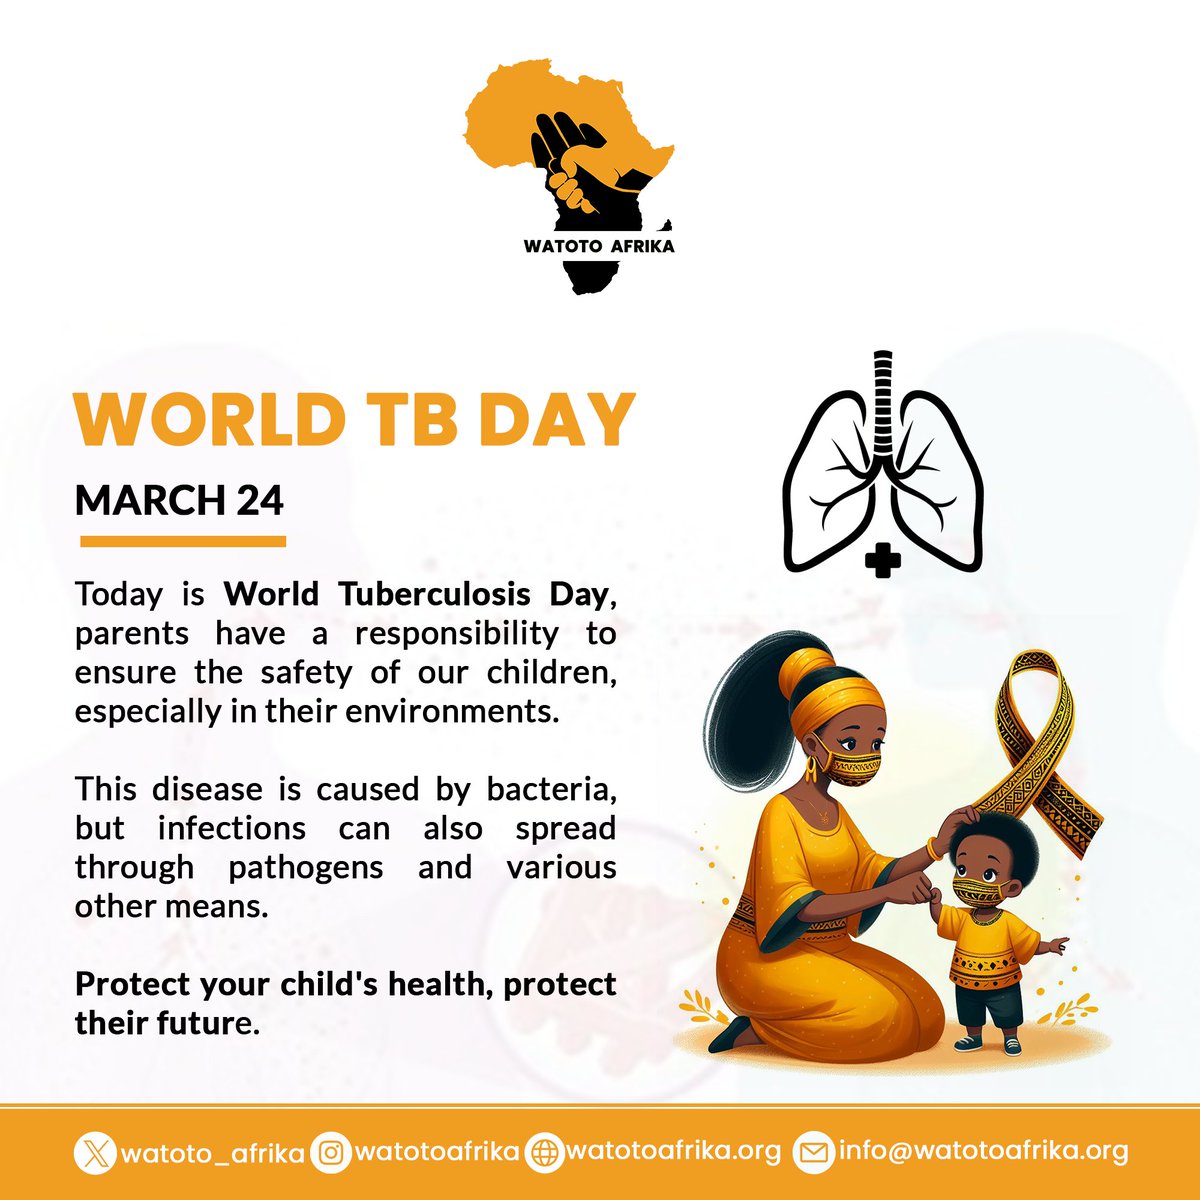 Today is World Tuberculosis Day

Parents have a responsibility to ensure the safety of their children, especially in their environments.  Protect your child's health, protect their future.

#WorldTBDay #WorldTBDay2024